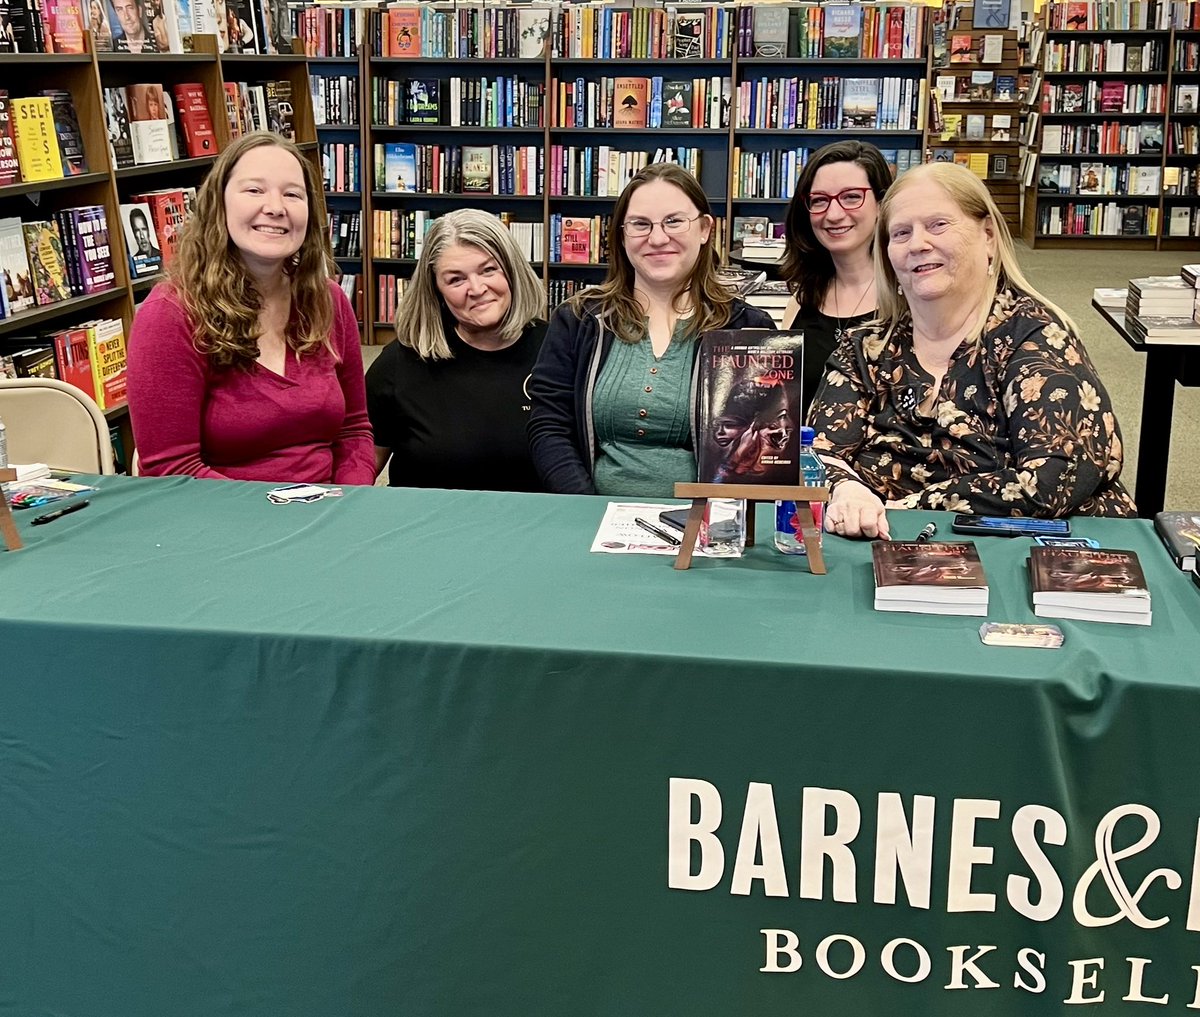 So these #womenveterans  were so much fun today! We had an awesome launch signing for THE HAUNTED ZONE. I have to thank so many people who came by to chat and supported us. It was such a pleasure. ❤️ #horrorcommunity